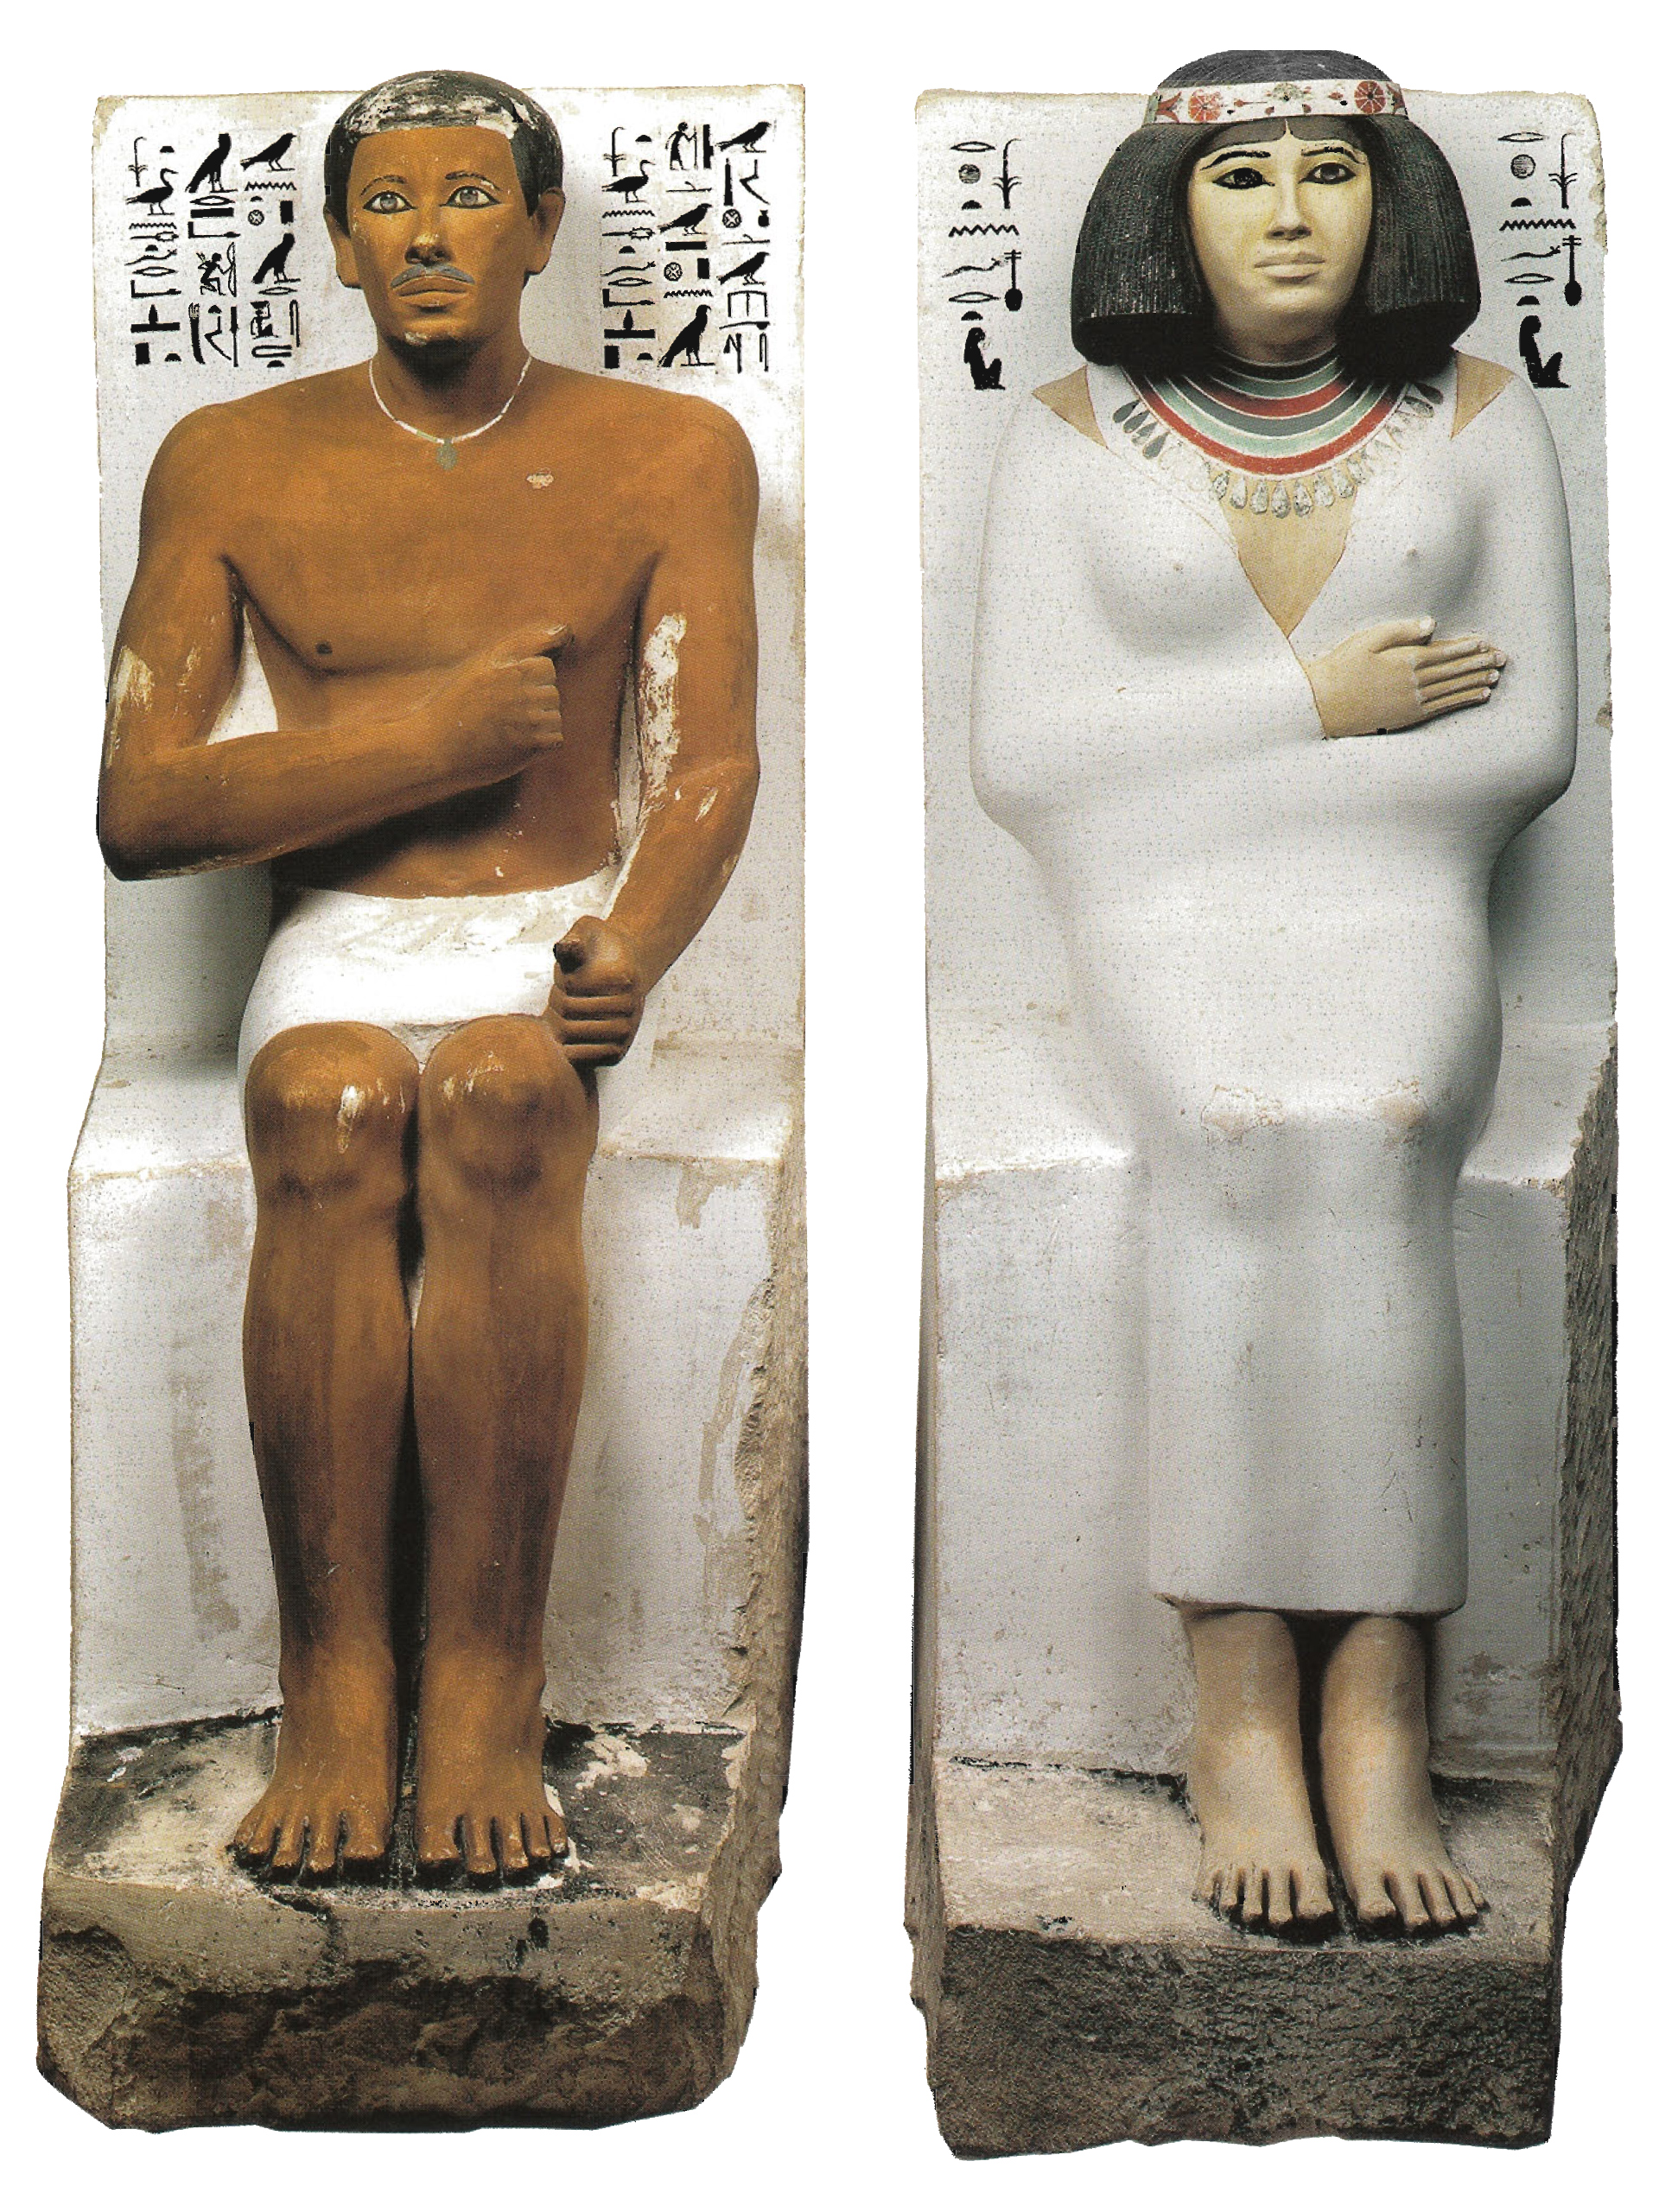 Prince Rahotep, son of King Snefru and half-brother of King Khufu, and his wife Nefret statues, with their eyes inlaid with rock crystal and quartz that give the statues a particularly life-like appearance terrified the local workmen charged with excavating their tomb discovered in their Meidum mastaba in 1871 and moved to Cairo Museum.